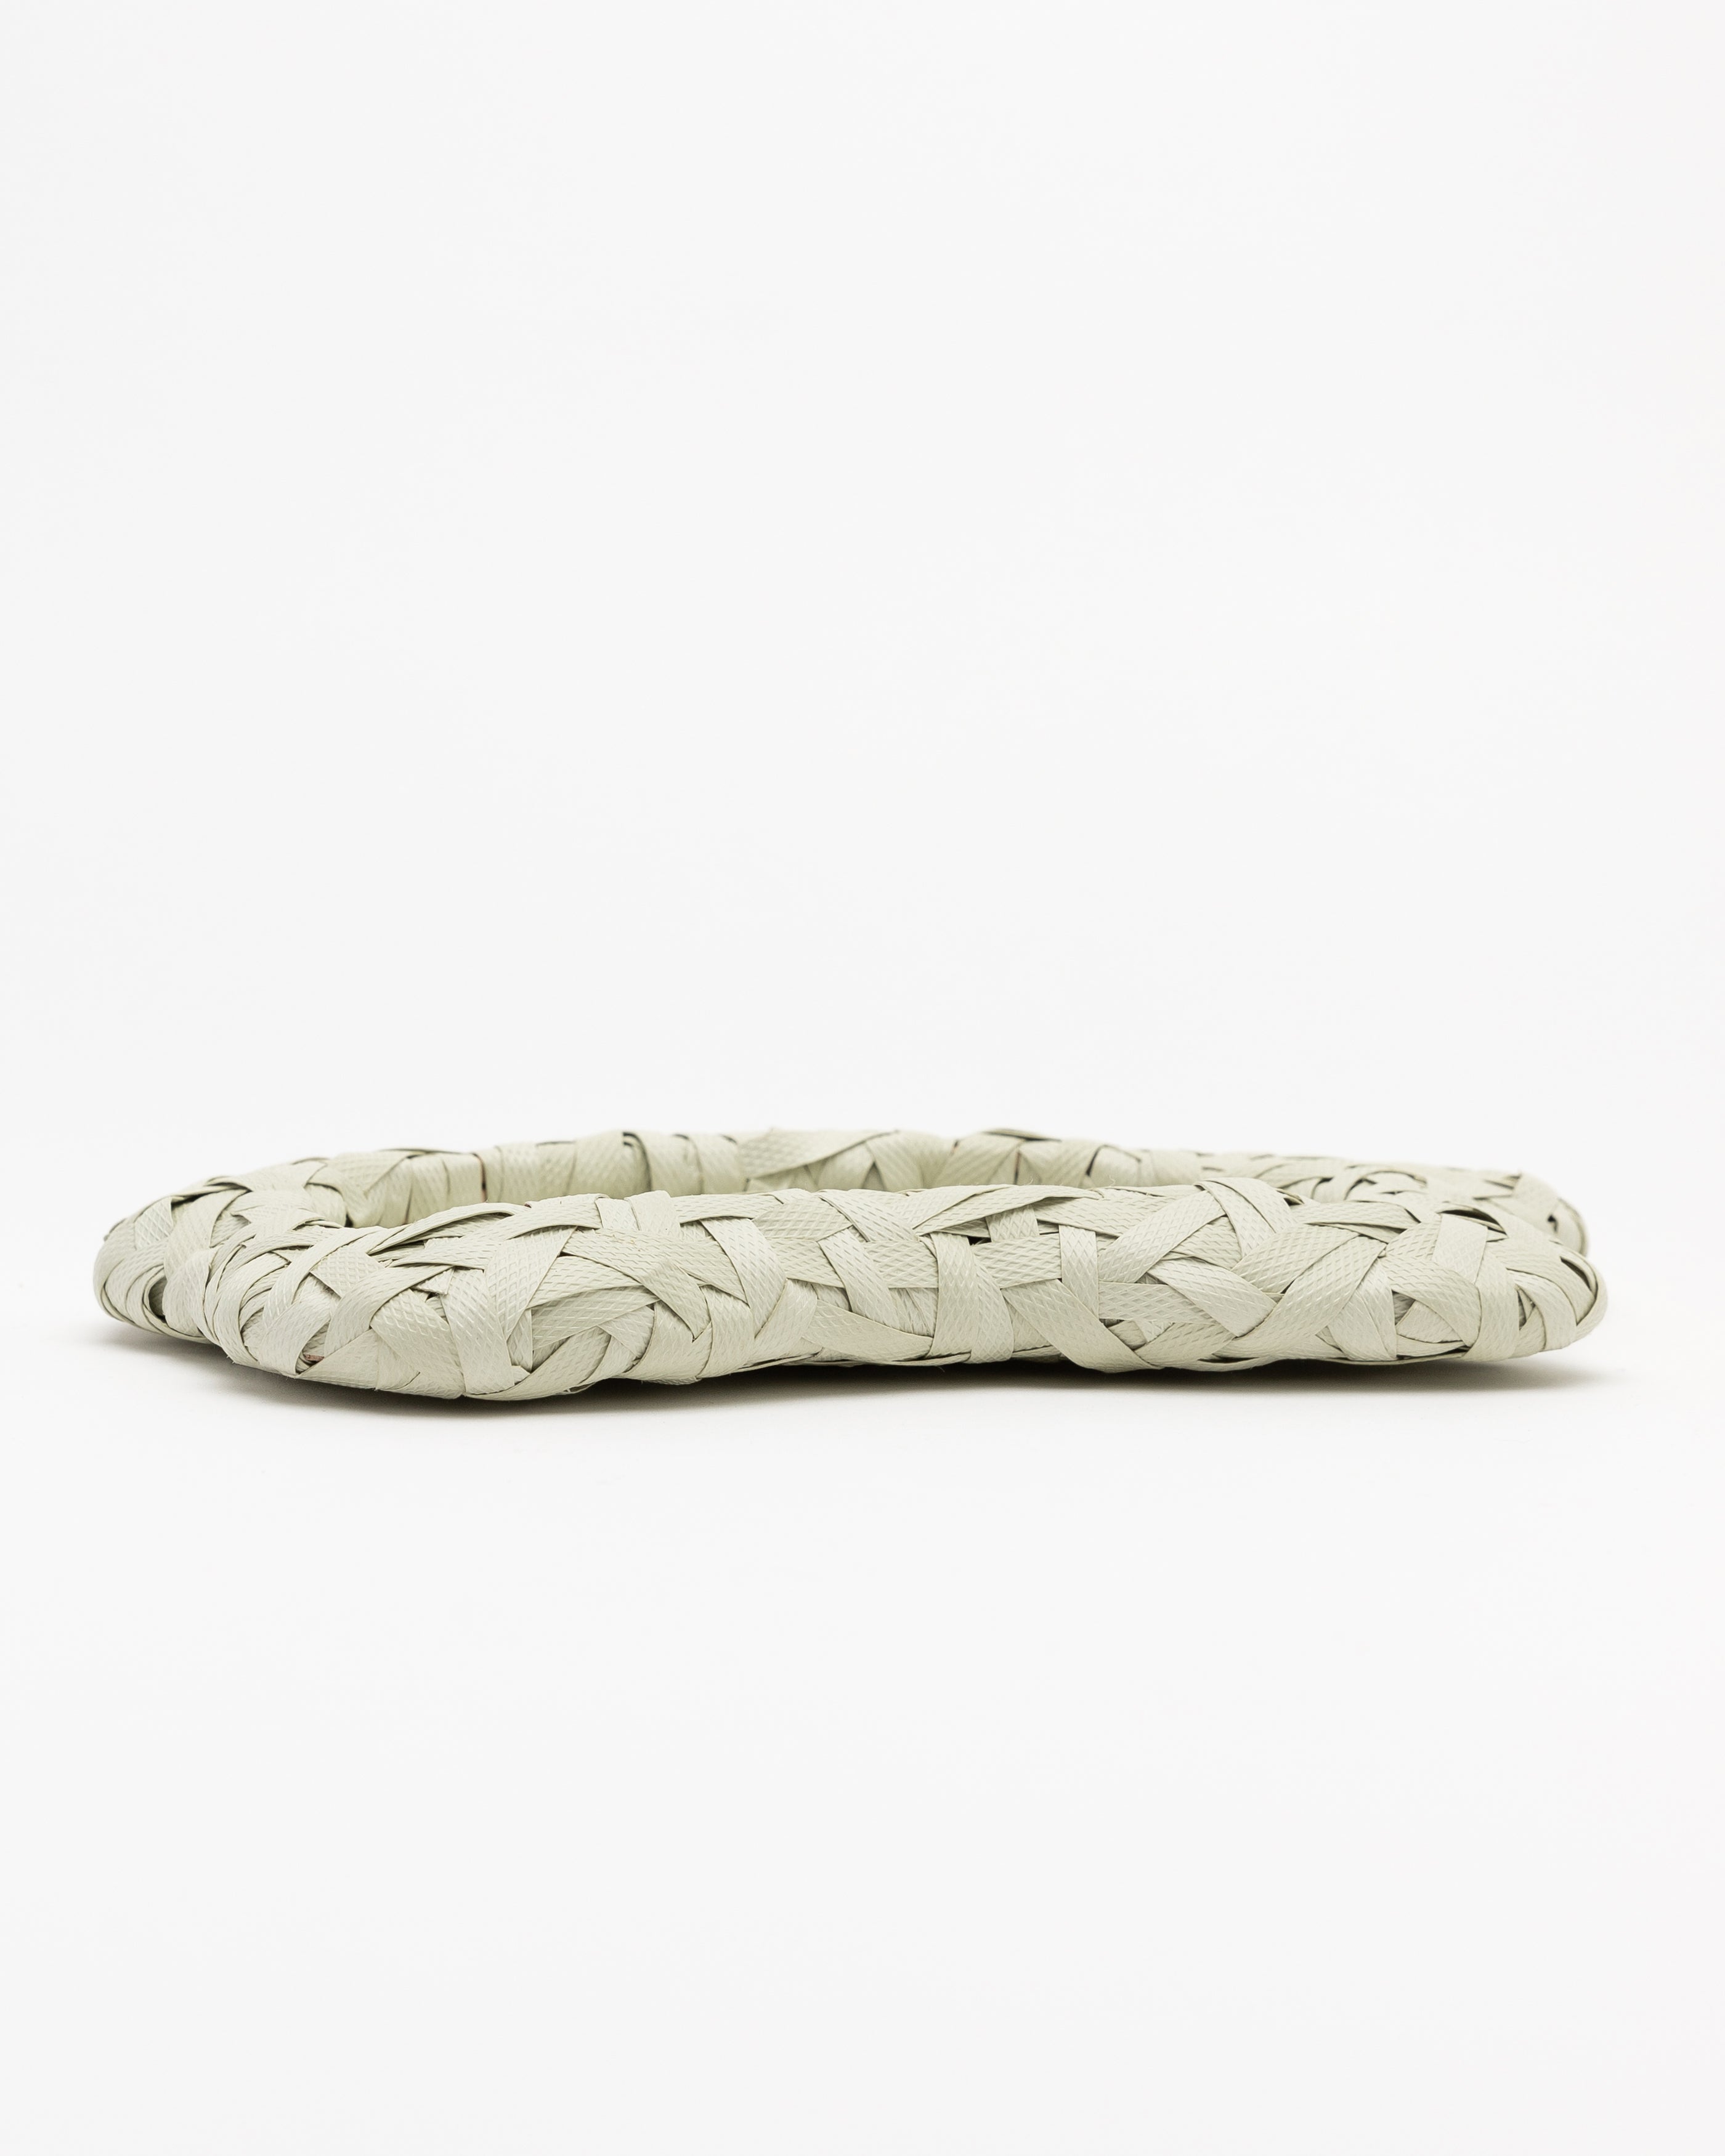 Woven Ecology Tray in White